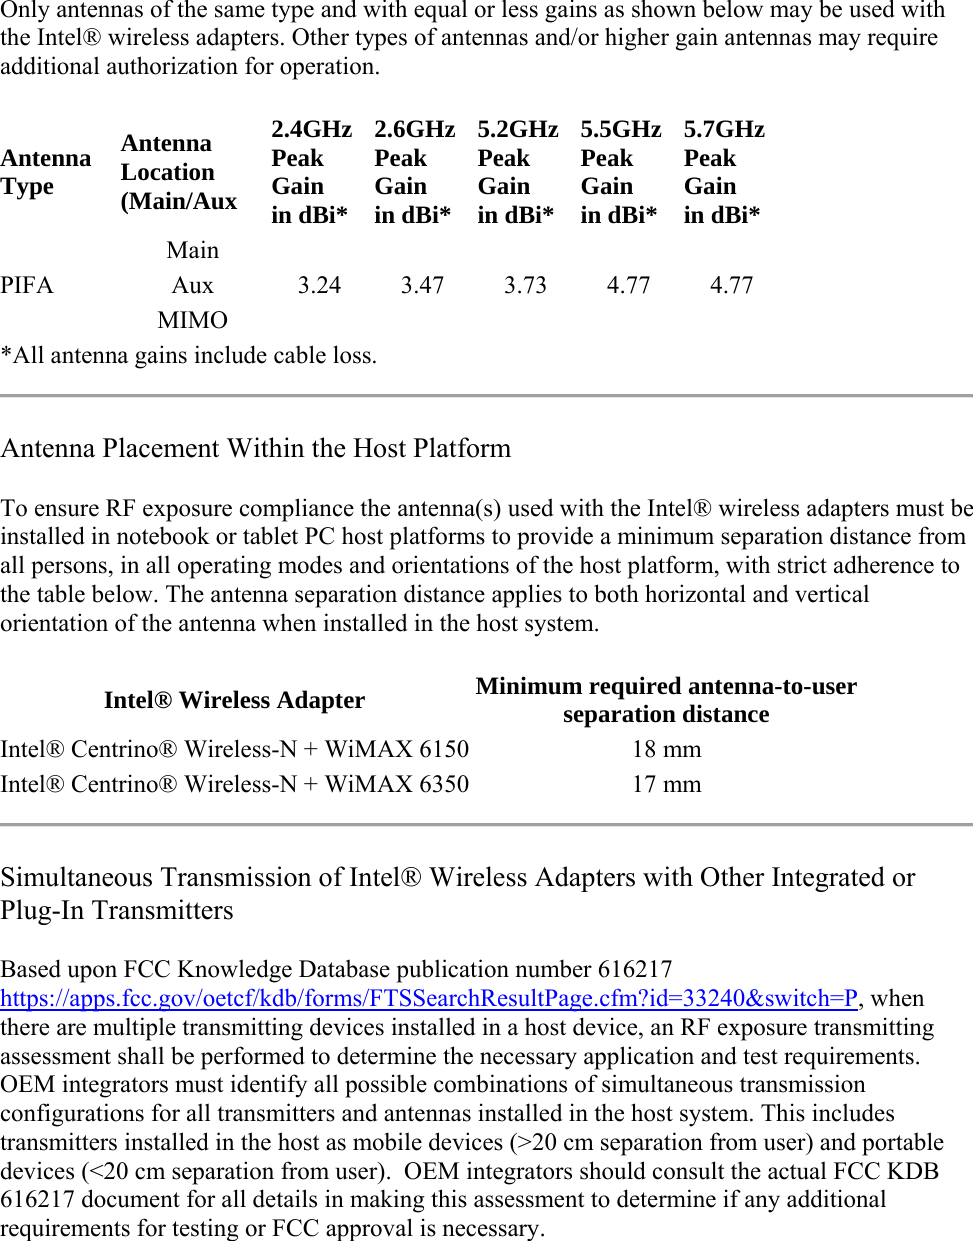 Only antennas of the same type and with equal or less gains as shown below may be used with the Intel® wireless adapters. Other types of antennas and/or higher gain antennas may require additional authorization for operation. Antenna Type Antenna Location (Main/Aux 2.4GHz Peak Gain in dBi* 2.6GHzPeak Gain in dBi*5.2GHzPeak Gain in dBi*5.5GHzPeak Gain in dBi*5.7GHz  Peak Gain in dBi* PIFA Main Aux  3.24 3.47 3.73 4.77 4.77 MIMO *All antenna gains include cable loss.  Antenna Placement Within the Host Platform To ensure RF exposure compliance the antenna(s) used with the Intel® wireless adapters must be installed in notebook or tablet PC host platforms to provide a minimum separation distance from all persons, in all operating modes and orientations of the host platform, with strict adherence to the table below. The antenna separation distance applies to both horizontal and vertical orientation of the antenna when installed in the host system. Intel® Wireless Adapter Minimum required antenna-to-user separation distance  Intel® Centrino® Wireless-N + WiMAX 6150 18 mm  Intel® Centrino® Wireless-N + WiMAX 6350 17 mm   Simultaneous Transmission of Intel® Wireless Adapters with Other Integrated or Plug-In Transmitters Based upon FCC Knowledge Database publication number 616217 https://apps.fcc.gov/oetcf/kdb/forms/FTSSearchResultPage.cfm?id=33240&amp;switch=P, when there are multiple transmitting devices installed in a host device, an RF exposure transmitting assessment shall be performed to determine the necessary application and test requirements.  OEM integrators must identify all possible combinations of simultaneous transmission configurations for all transmitters and antennas installed in the host system. This includes transmitters installed in the host as mobile devices (&gt;20 cm separation from user) and portable devices (&lt;20 cm separation from user).  OEM integrators should consult the actual FCC KDB 616217 document for all details in making this assessment to determine if any additional requirements for testing or FCC approval is necessary.  